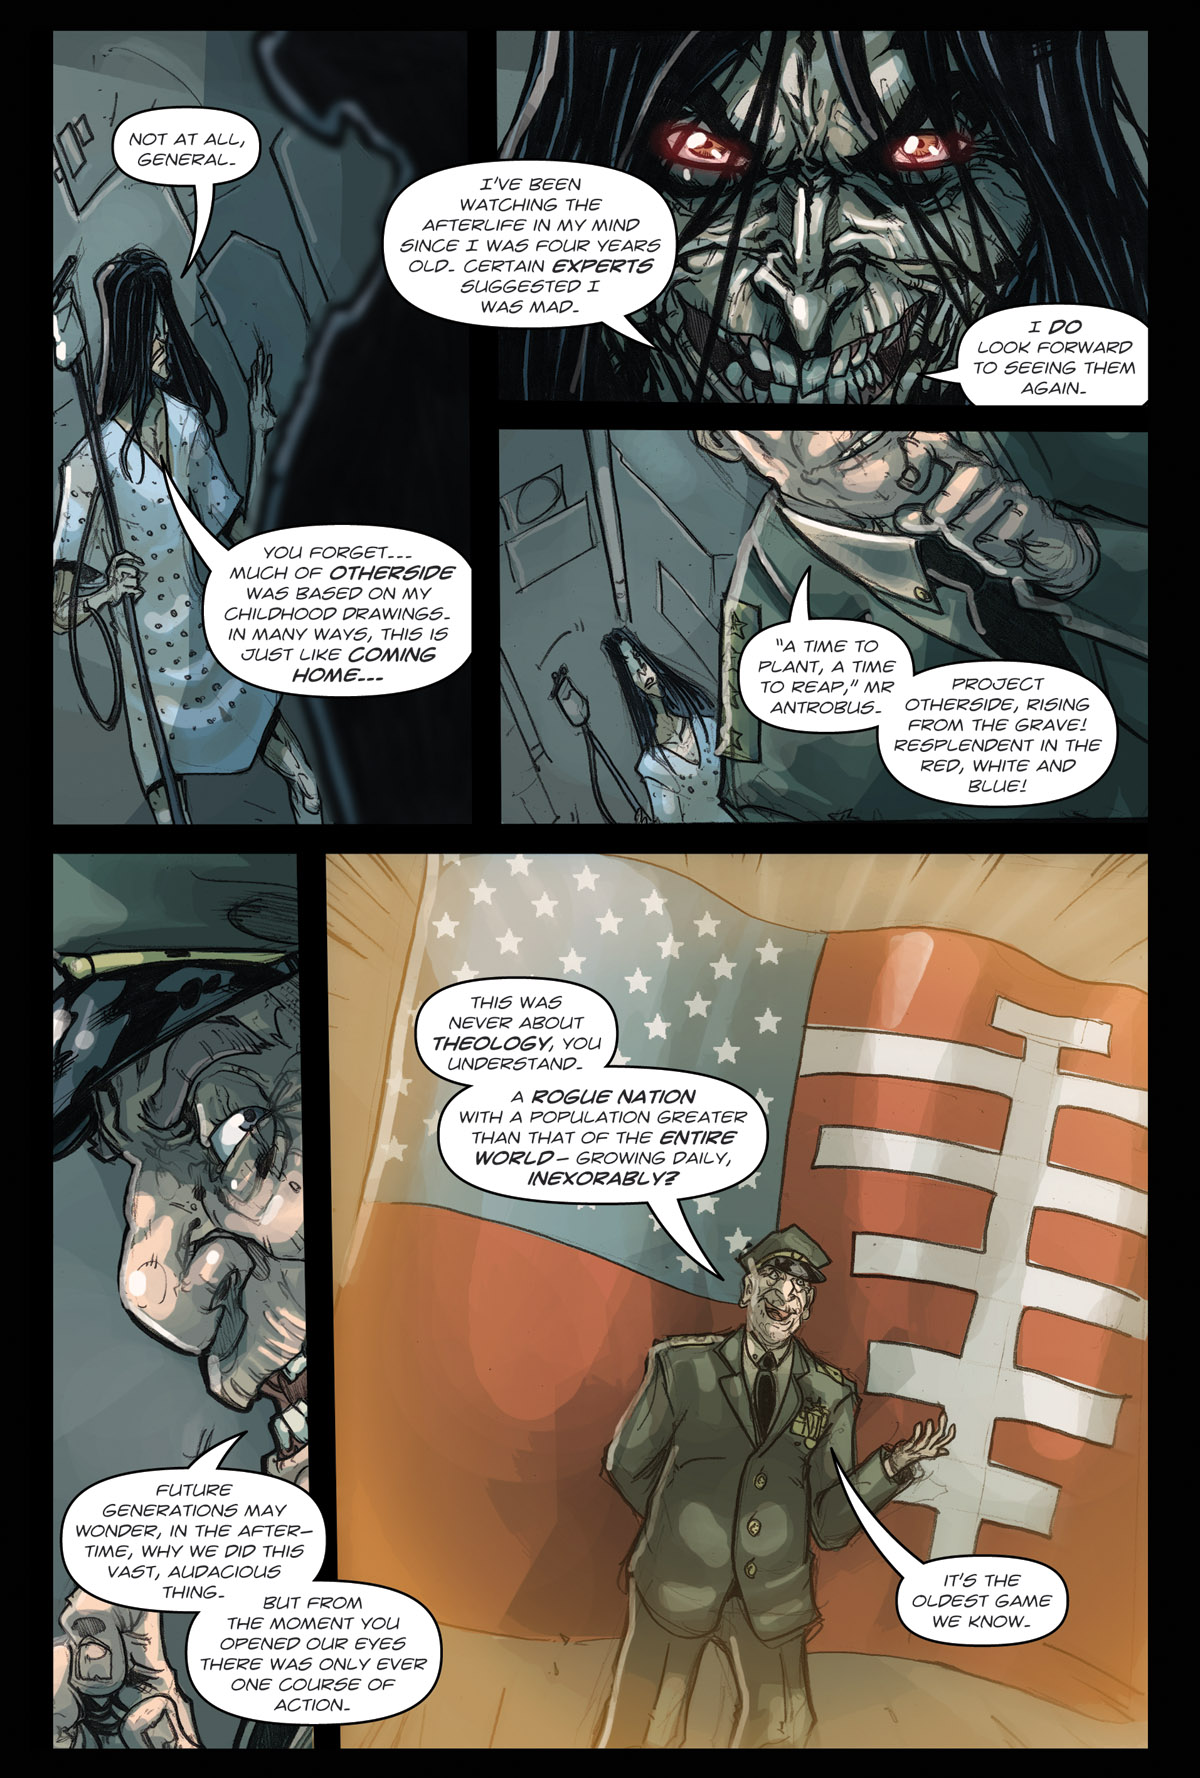 Afterlife Inc. | Near Life | Page 11